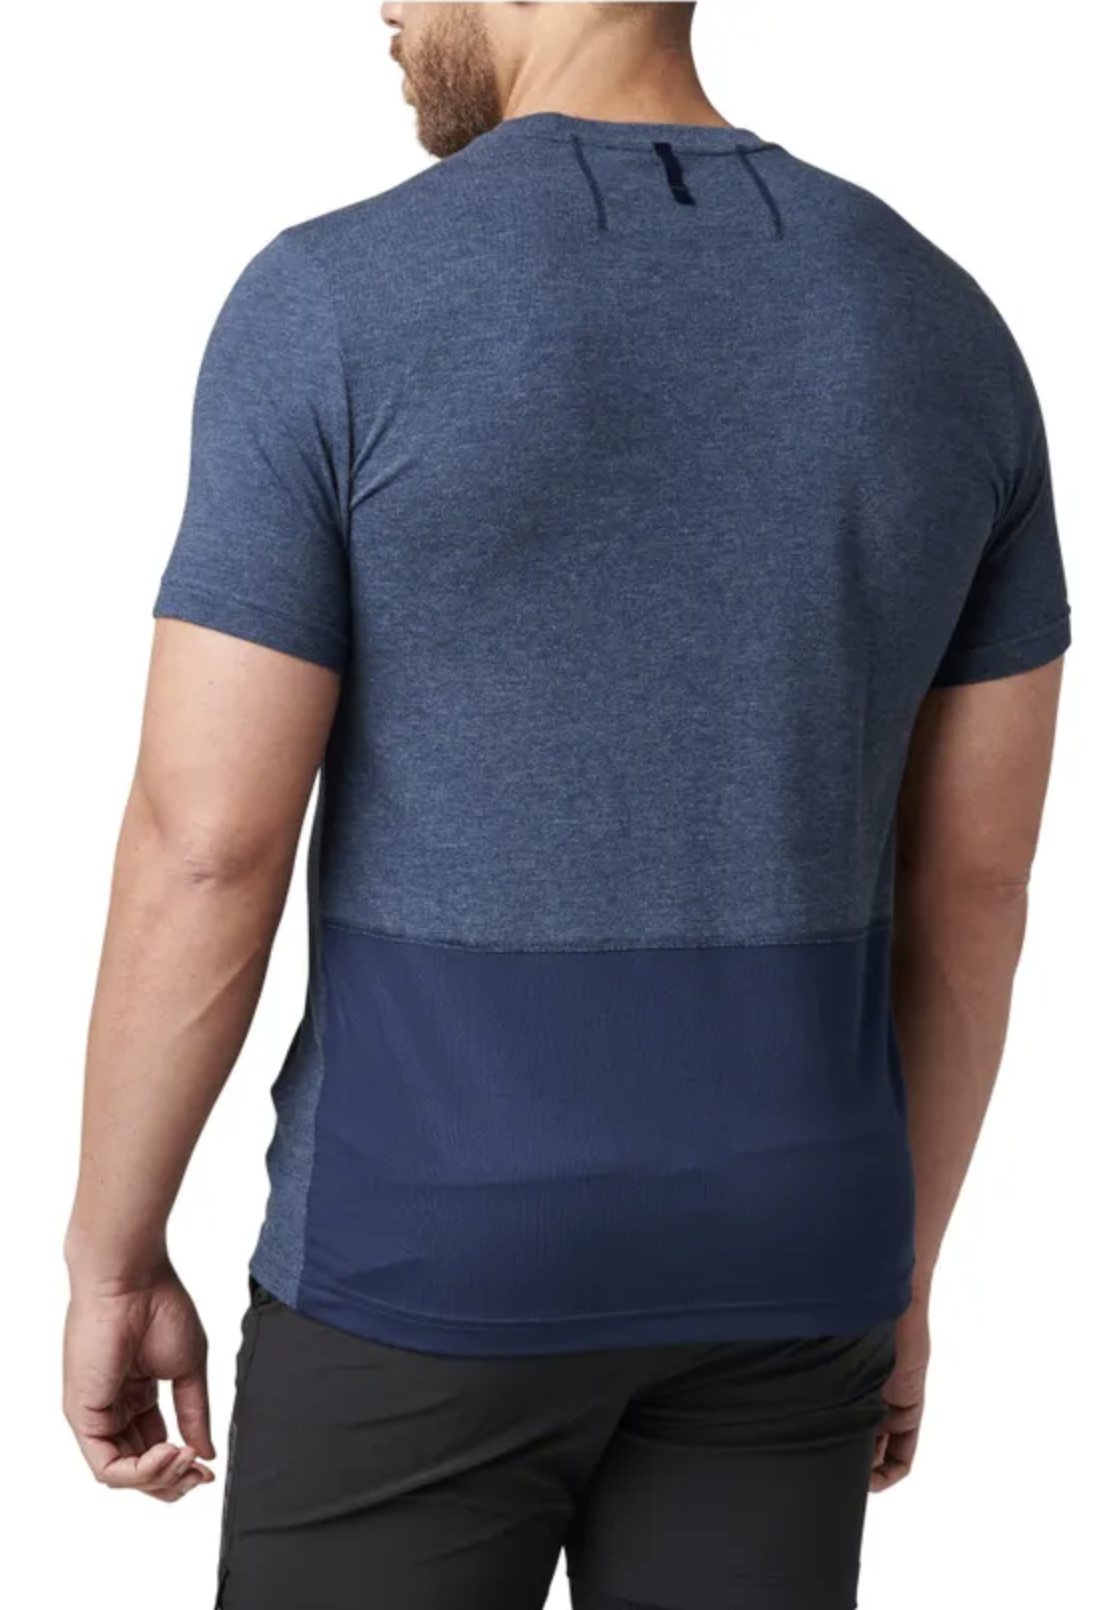 5.11 - PT-R Charge Short Sleeve Top 2.0 - Pacific Navy Heather (1052)